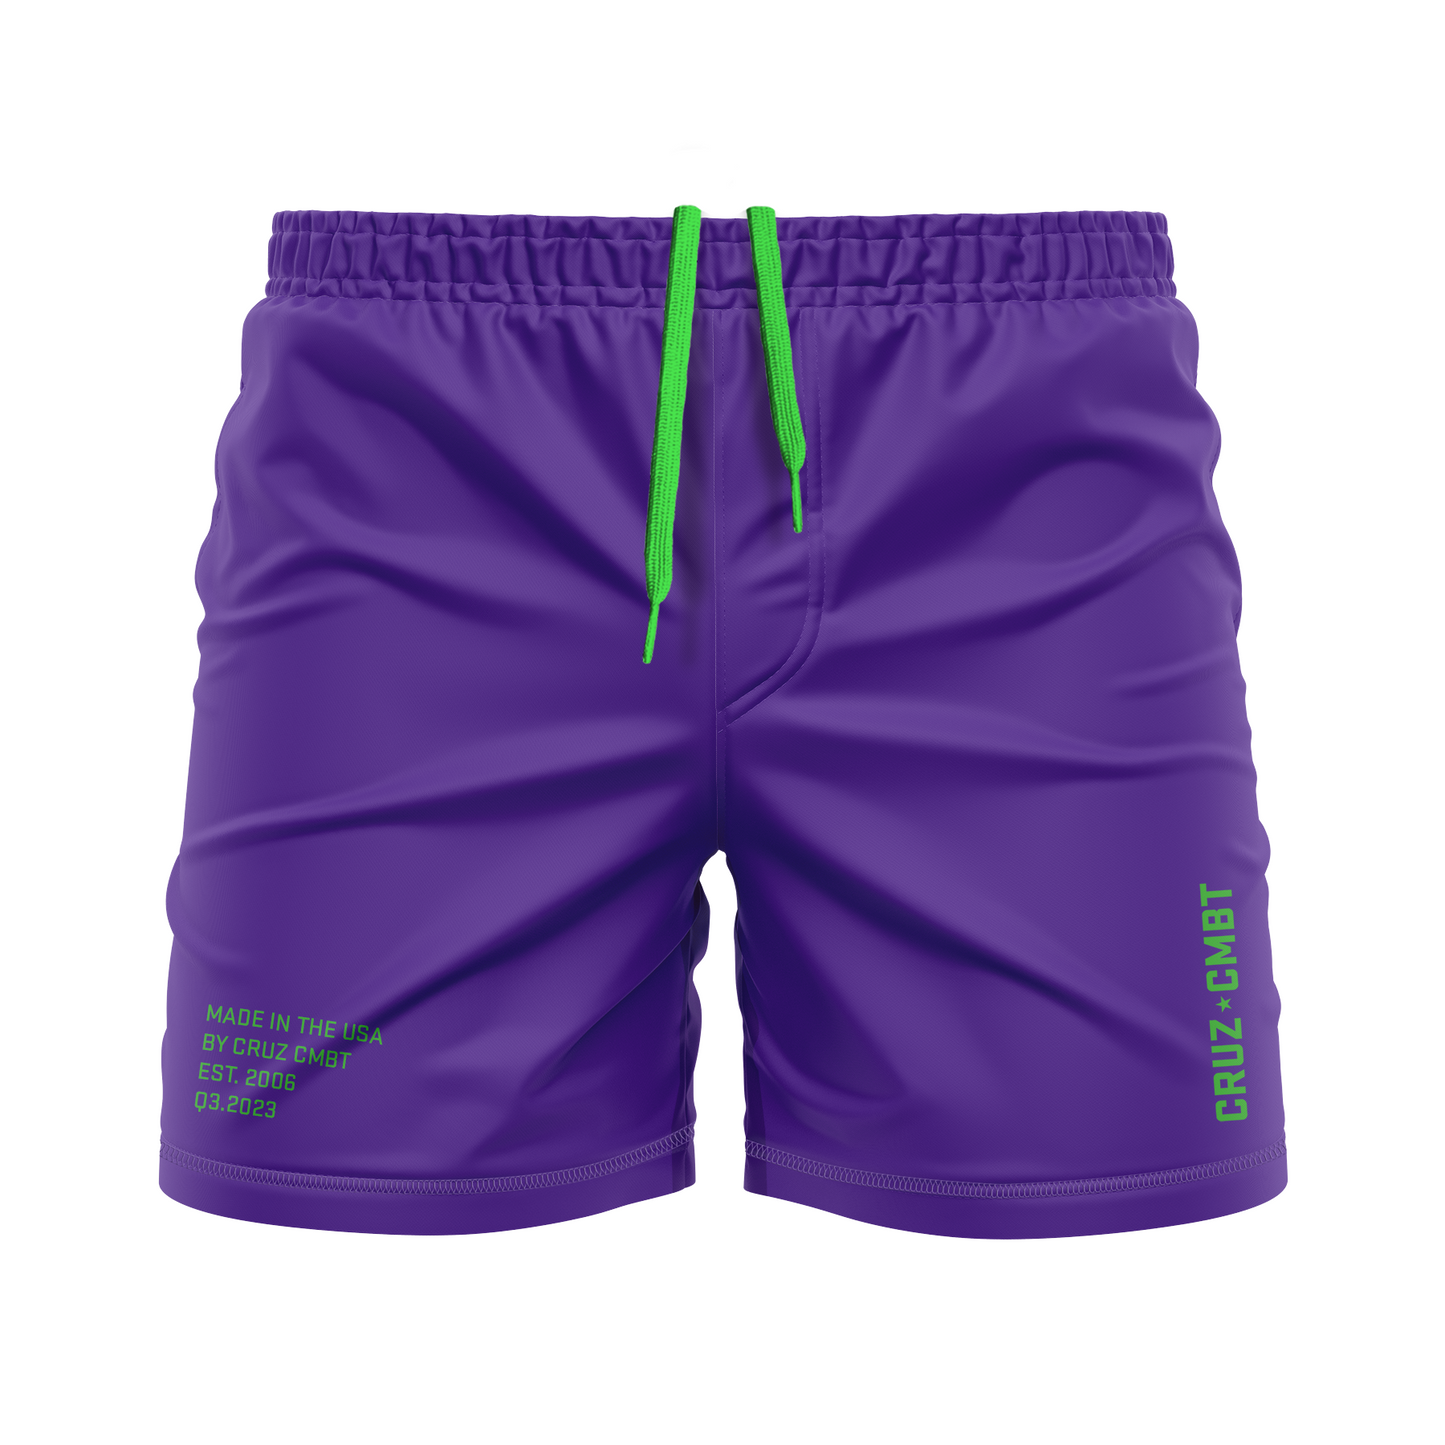 Base Collection men's FC shorts, purple and green